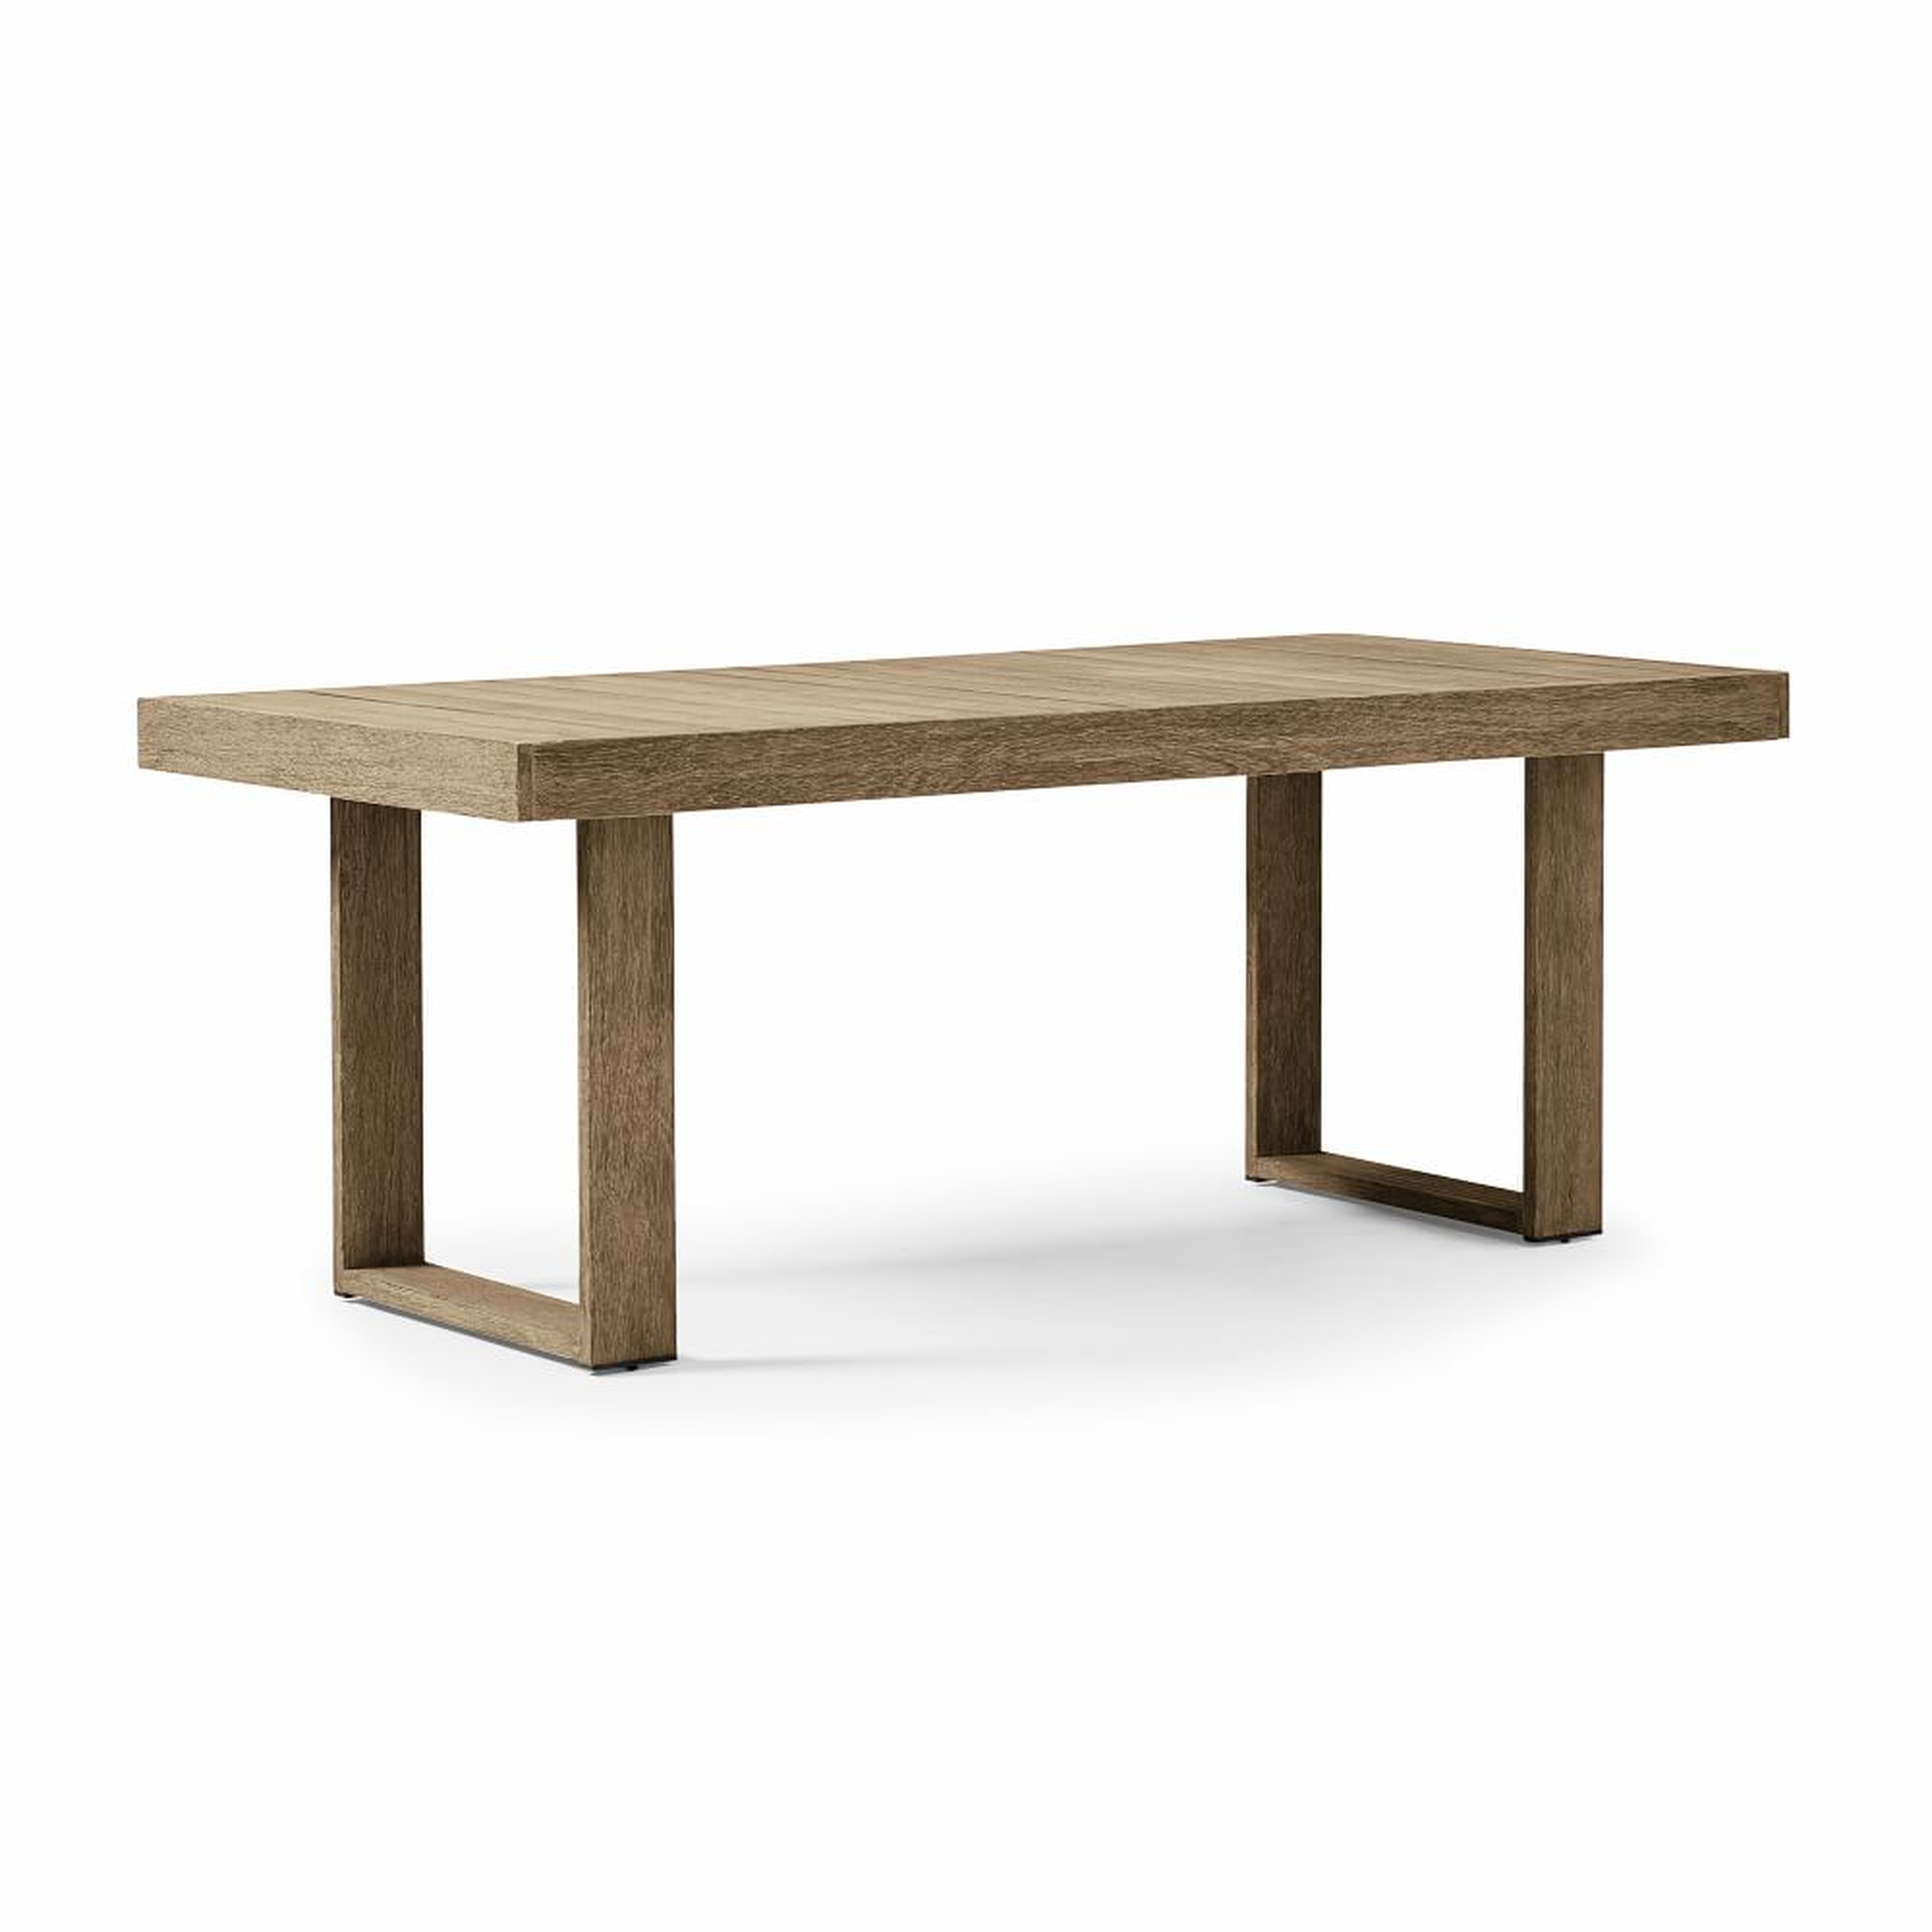 Portside Outdoor 76.5" Dining Table, Driftwood - West Elm